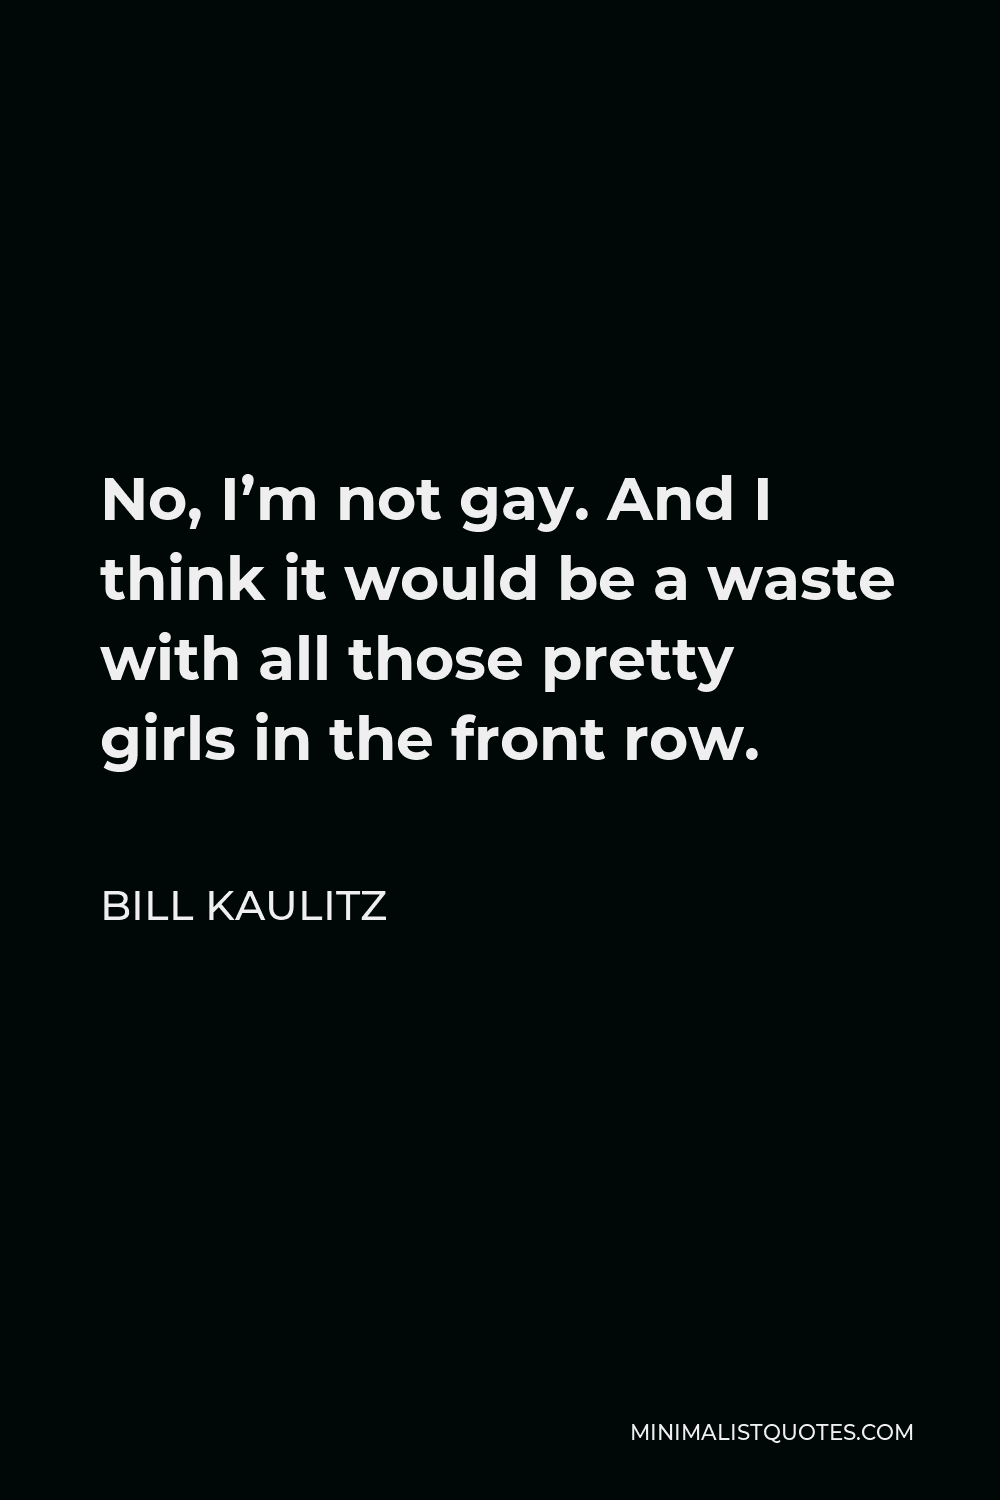 Bill Kaulitz Quote - No, I’m not gay. And I think it would be a waste with all those pretty girls in the front row.